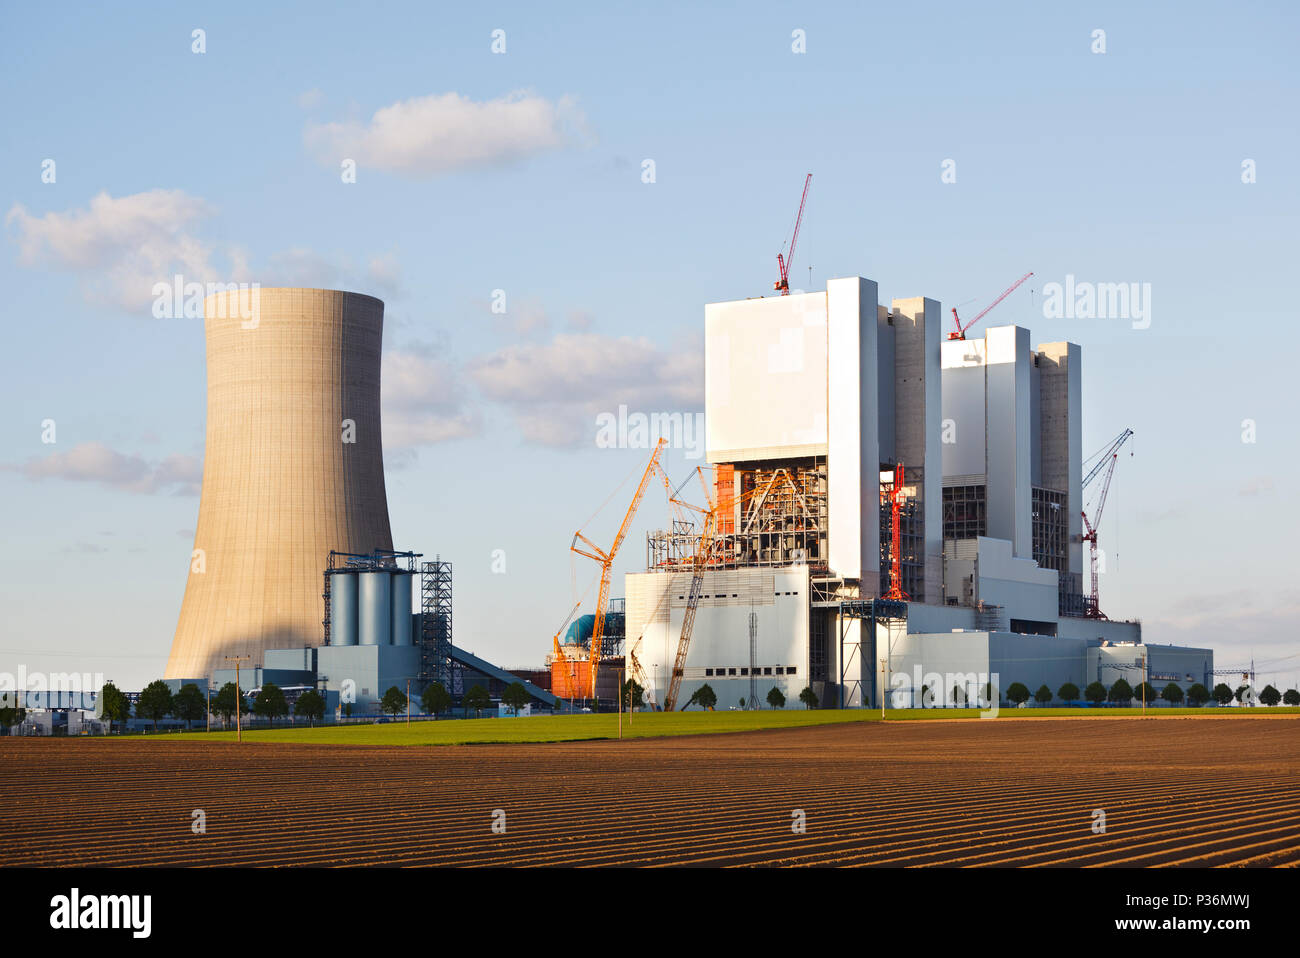 Construction site of a new brown coal power plant in evening light. Stock Photo